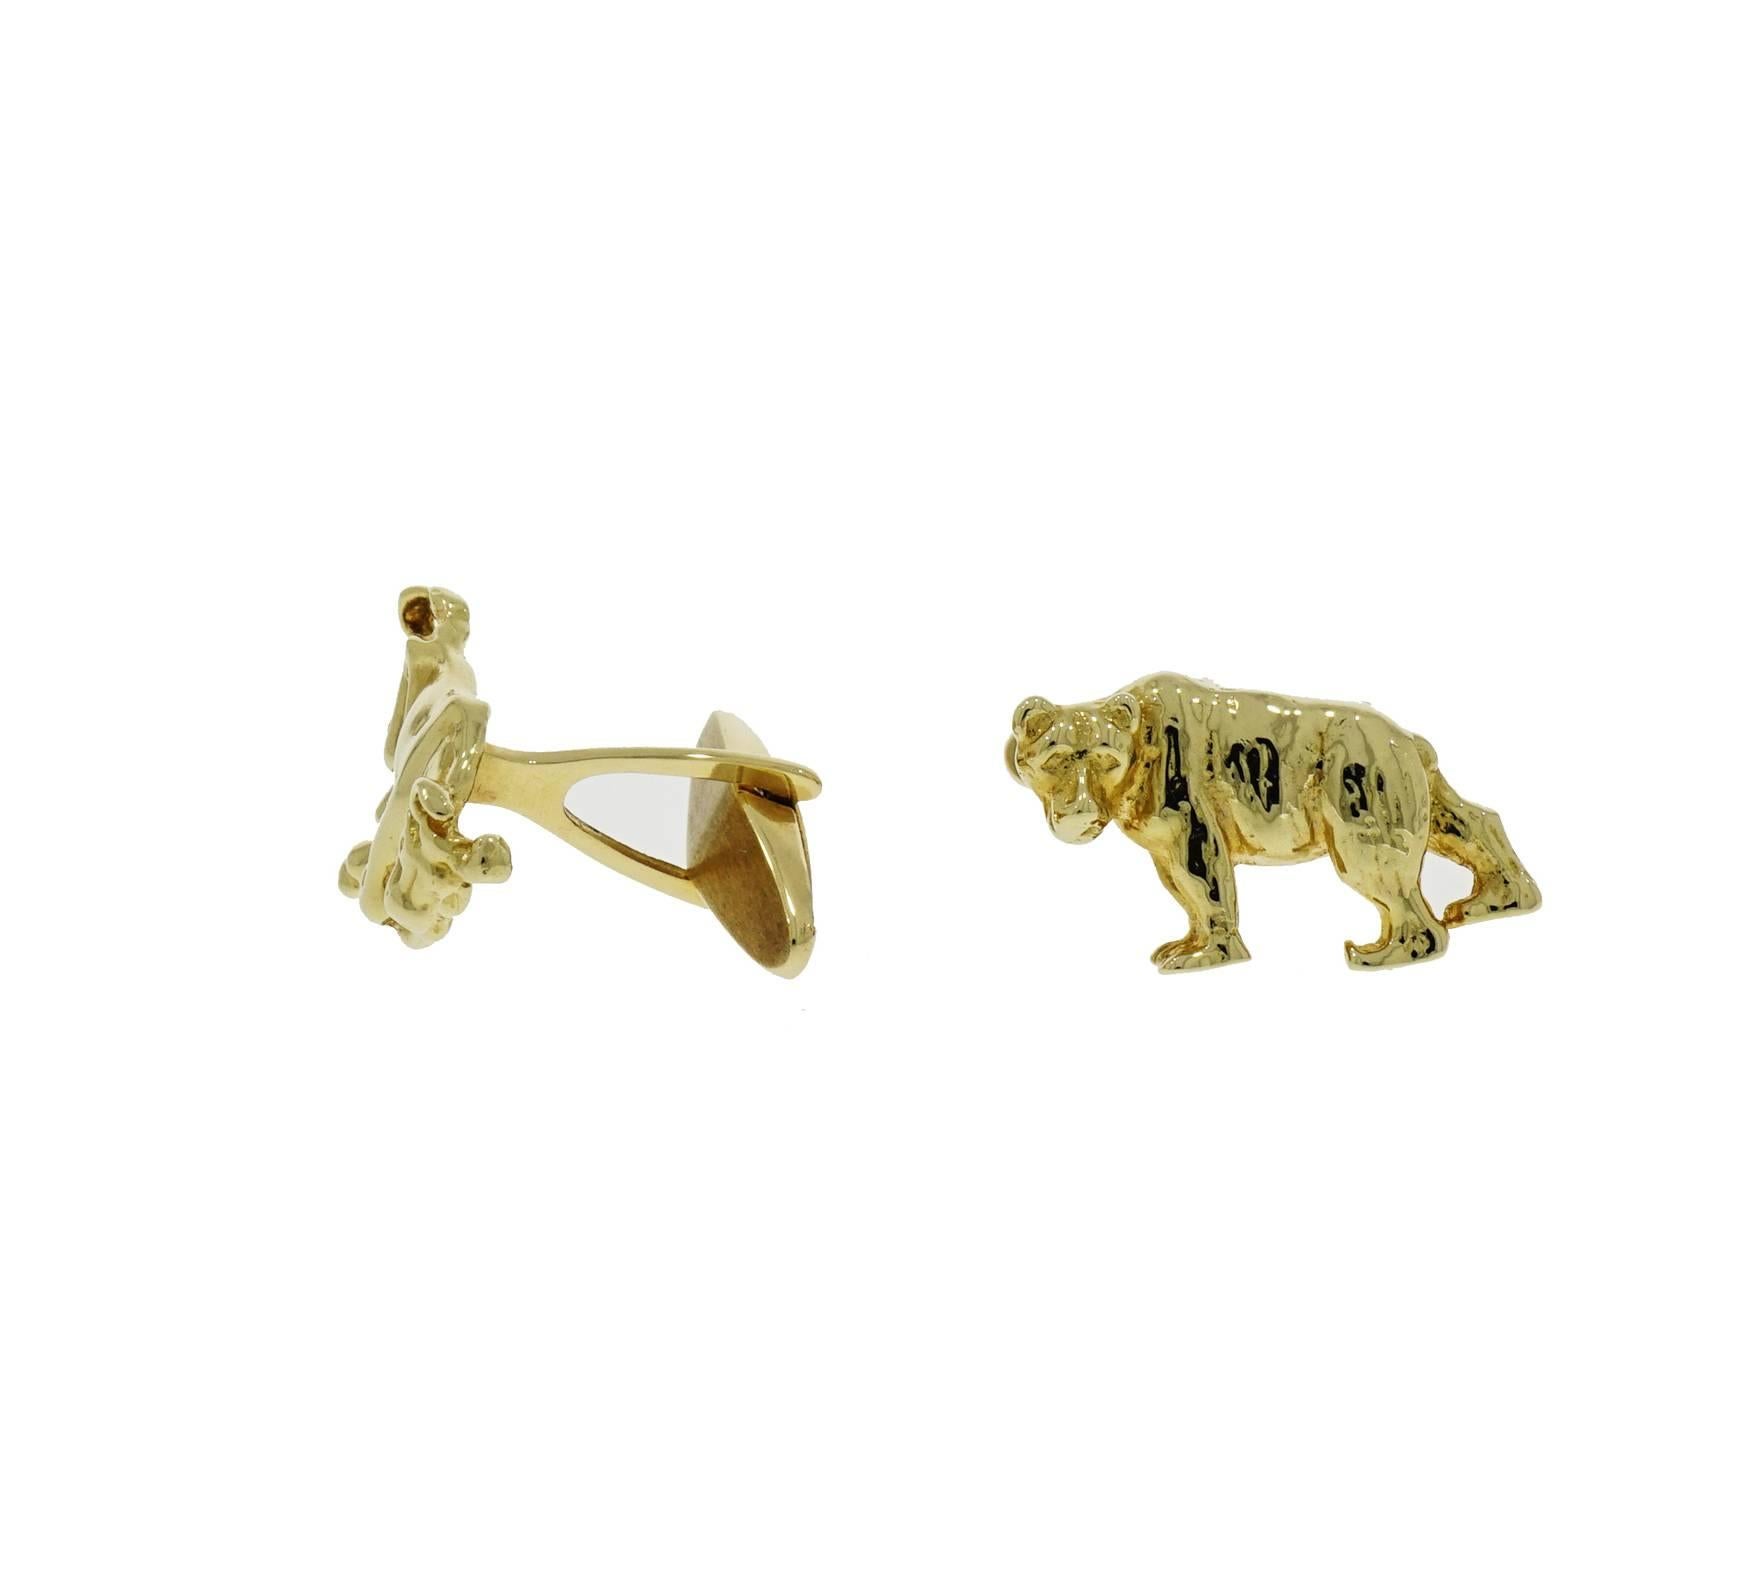 If you're in the market... You need these Cufflinks :)
You can get the perfect balance with these handcrafted Bull and Bear Yellow Gold Cufflinks.
The dimensions are approximately 15mm high x 25 wide.
Weights 13.53 grams